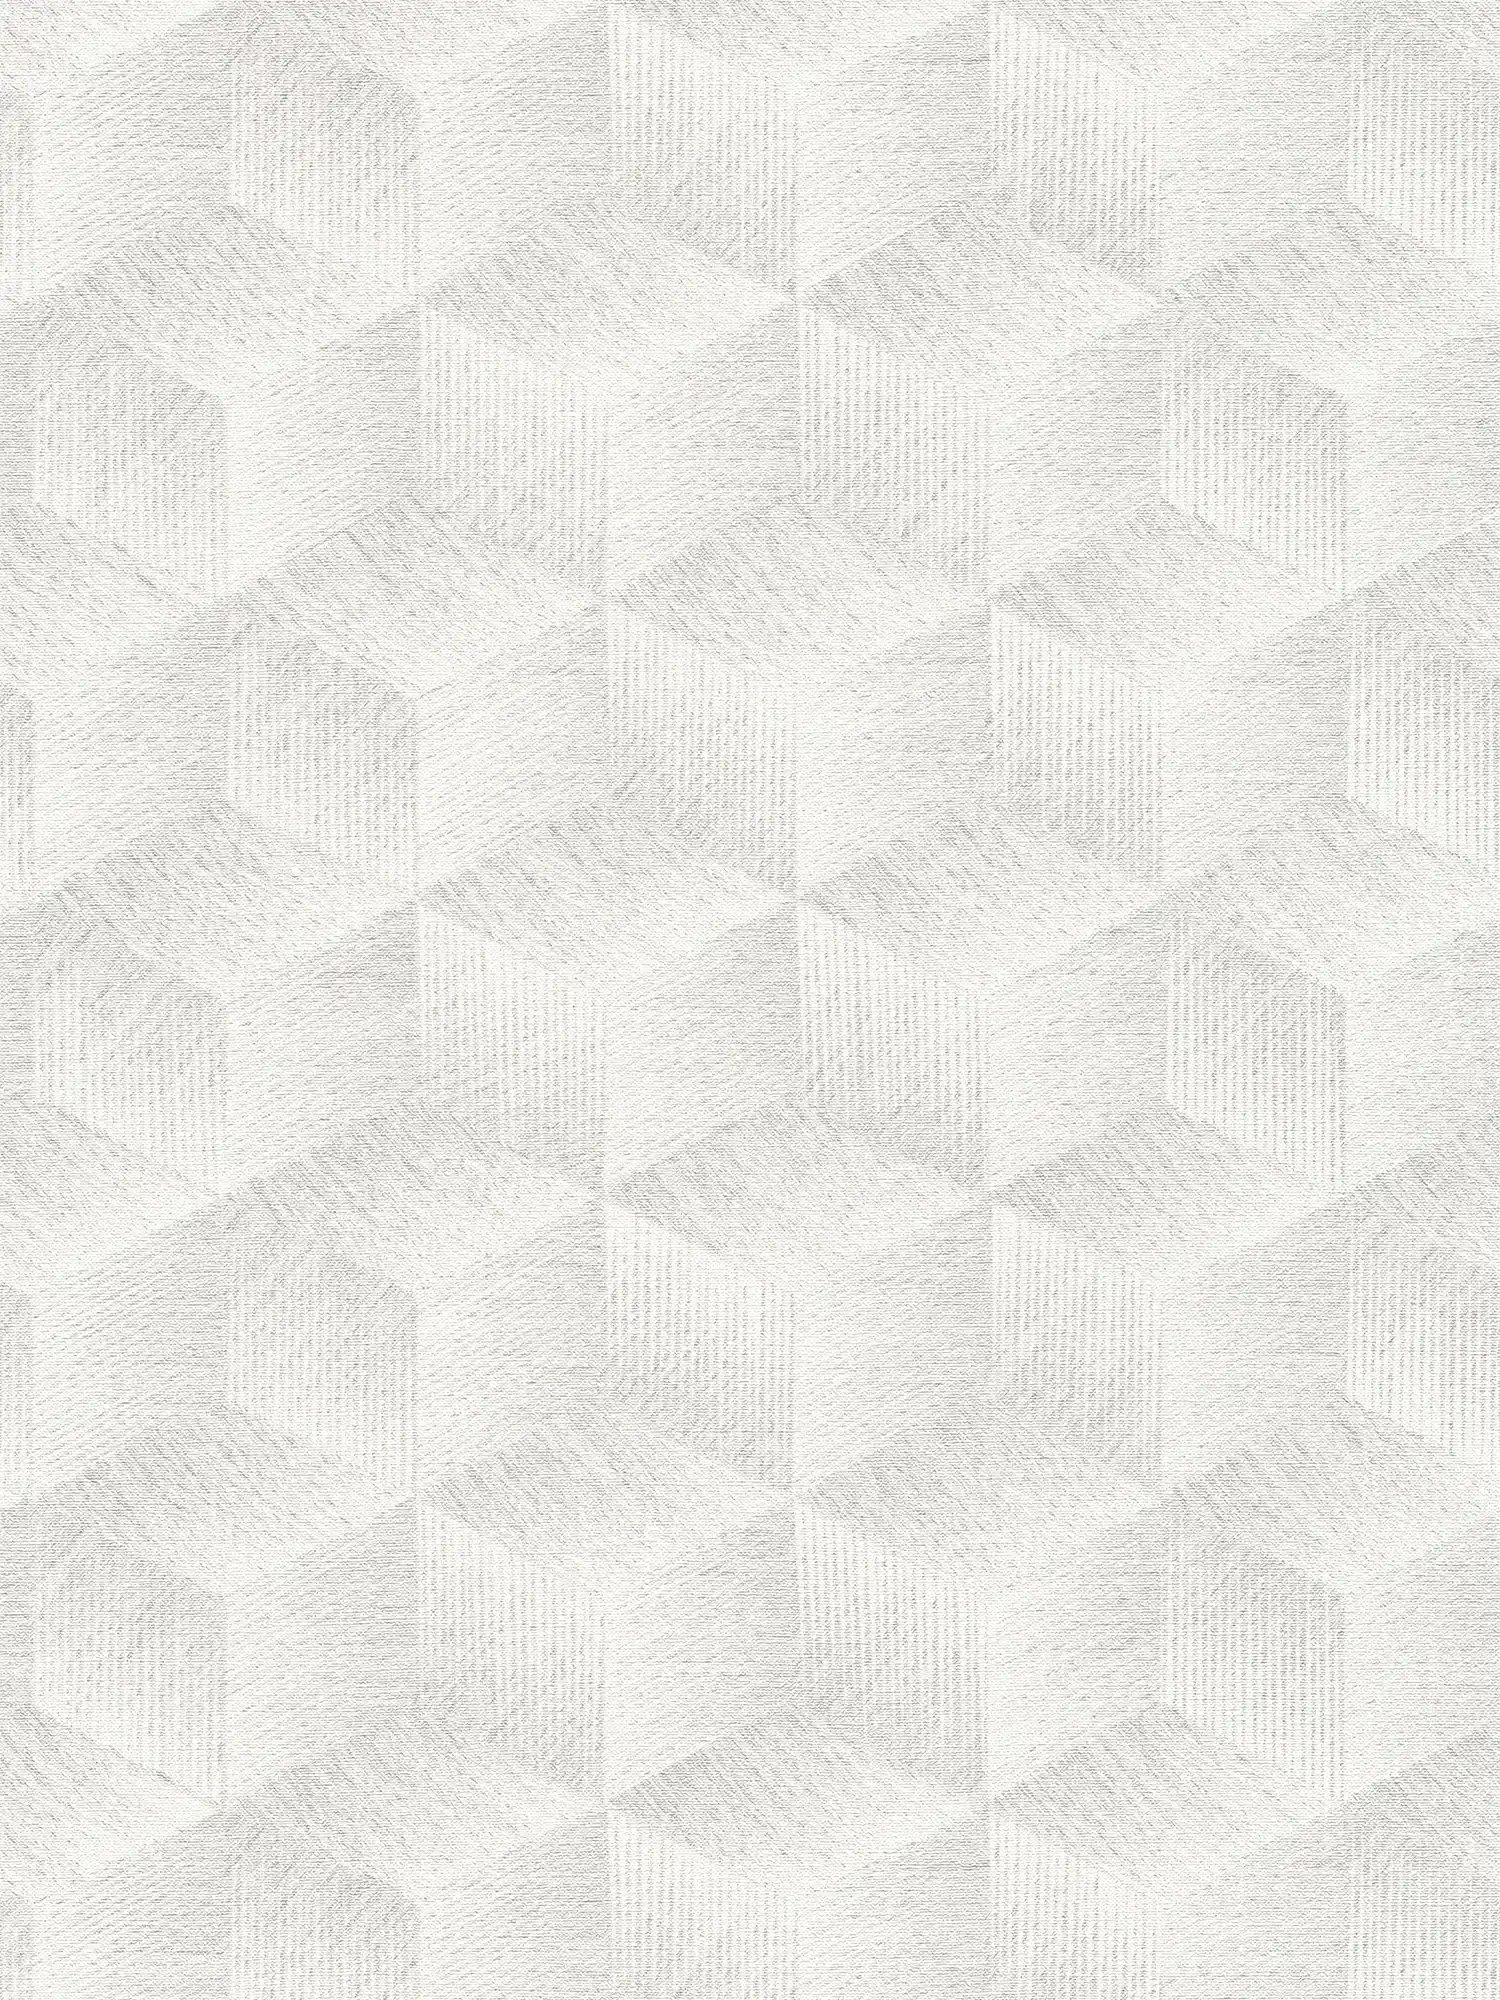 PVC-free 3D optical wallpaper with square pattern & gloss effect - Grey, White
